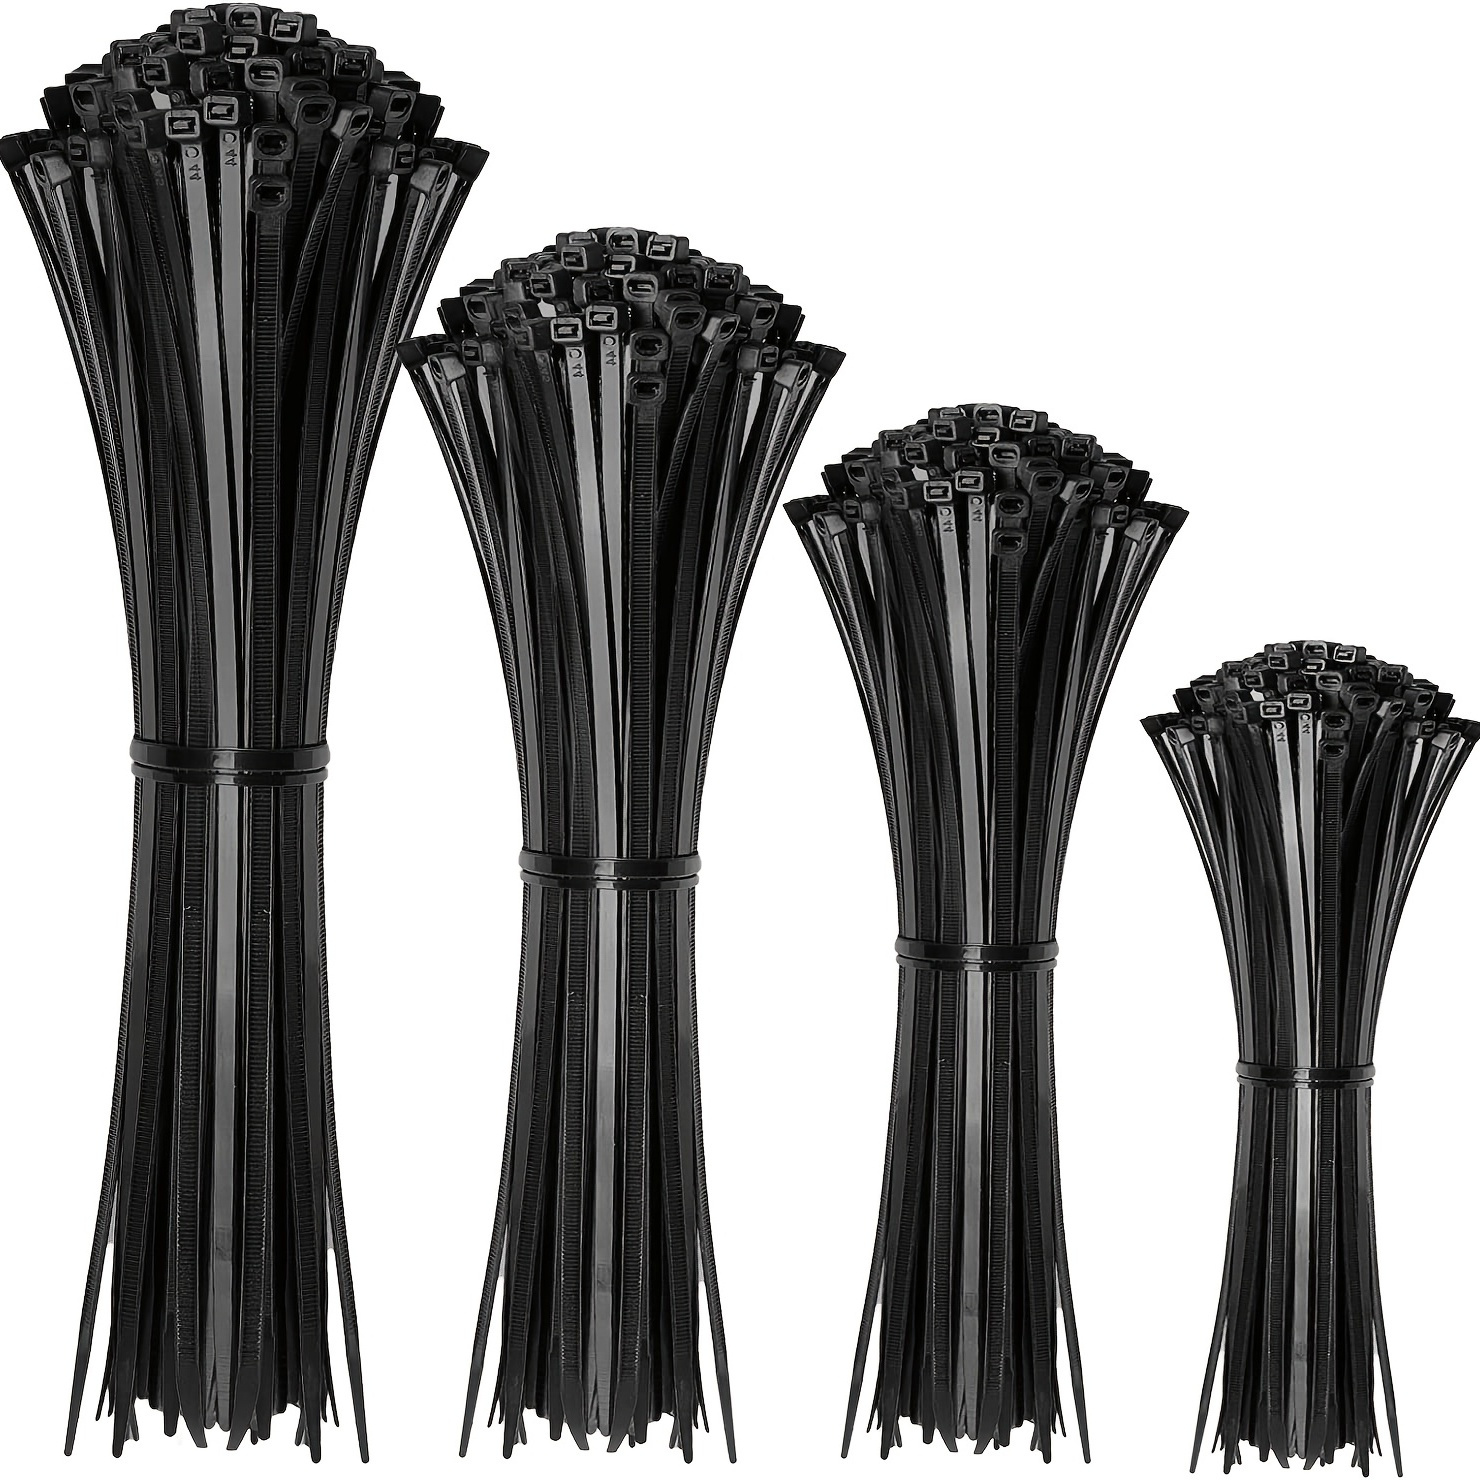 

100pcs Black Zip Ties - Assorted Sizes 12+8+6+4 Inch - Perfect For Home, Office, Garden & Workshop Cable Management